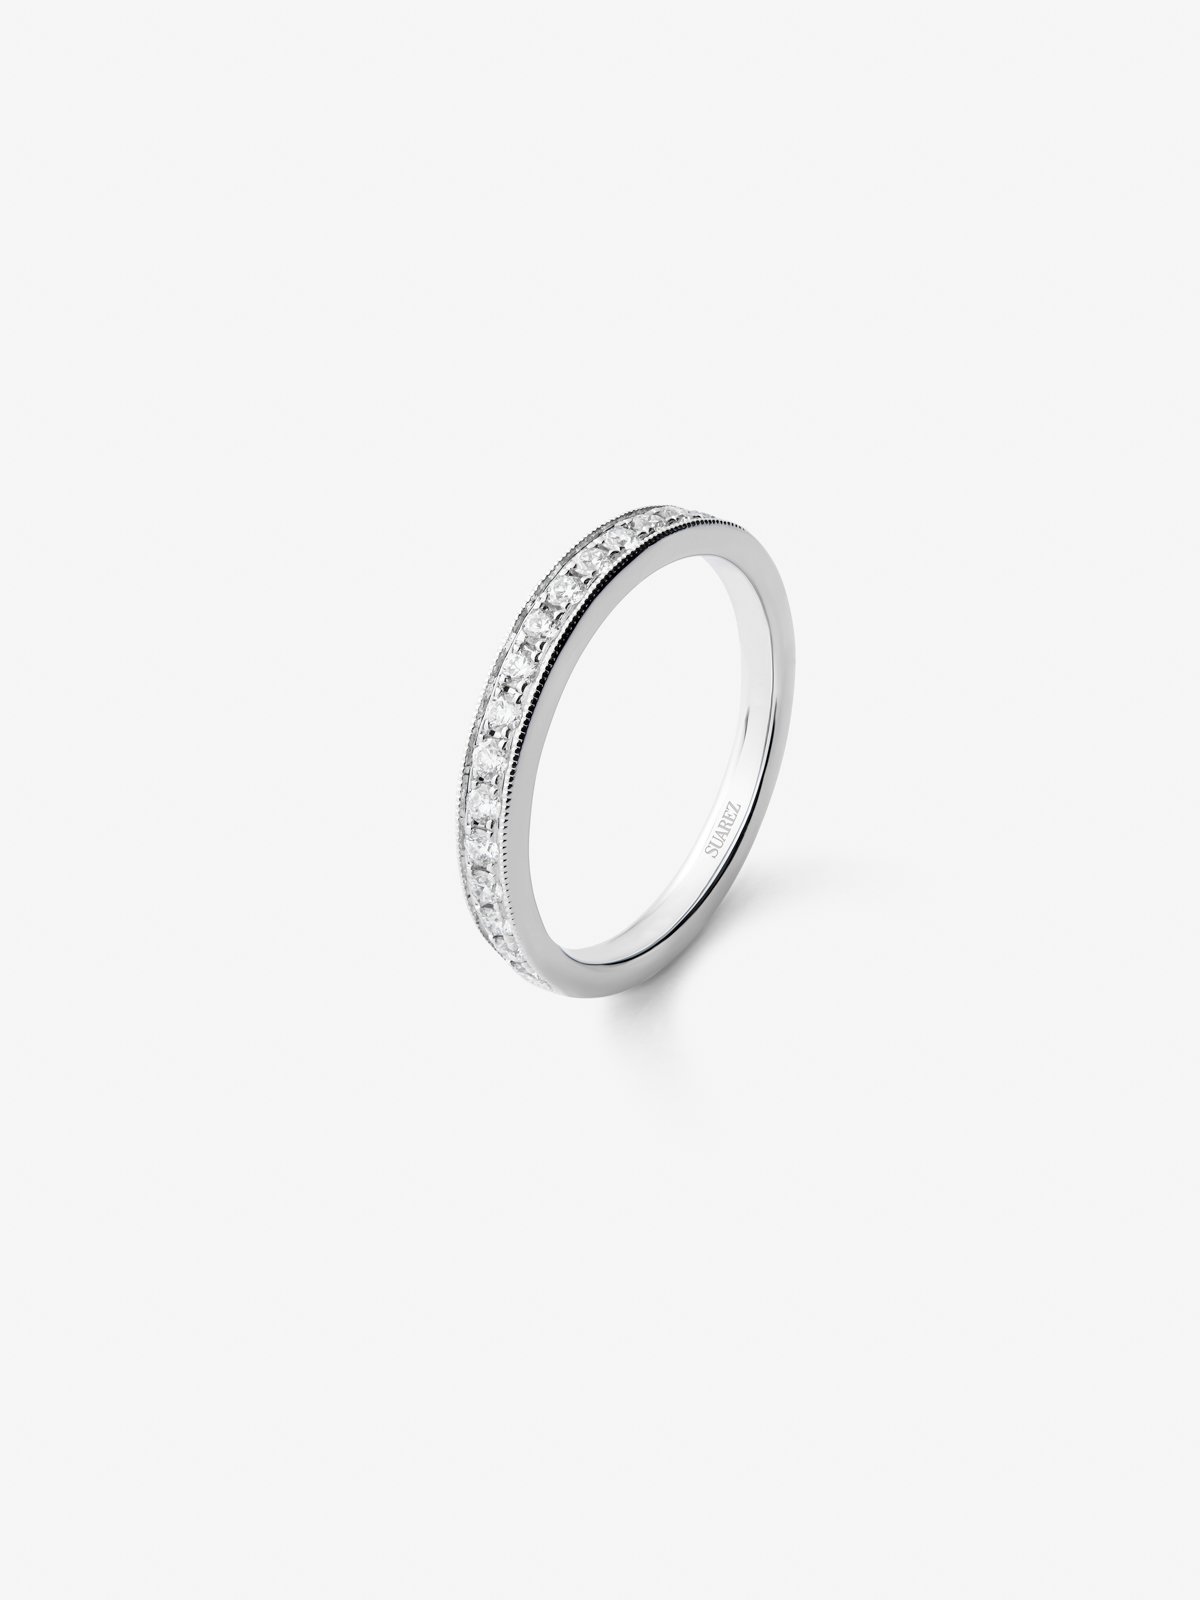 Half ring in 18K white gold with 16 brilliant-cut diamonds with a total of 0.29 cts